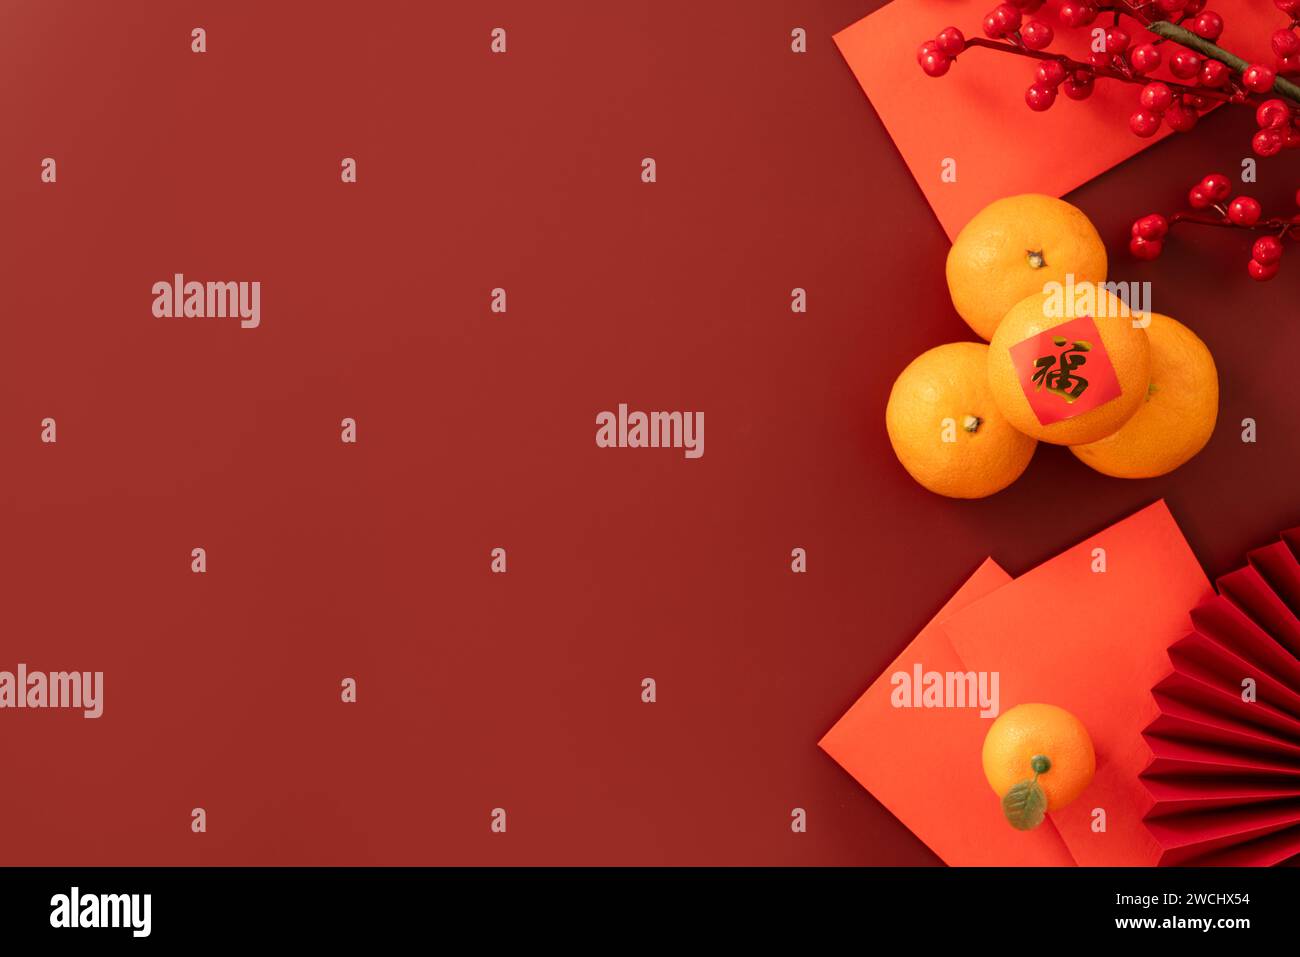 Chinese lunar new year background with fresh tangerine, red envelope, paper fan and decorations for Spring Festival and the word means fortune. Stock Photo